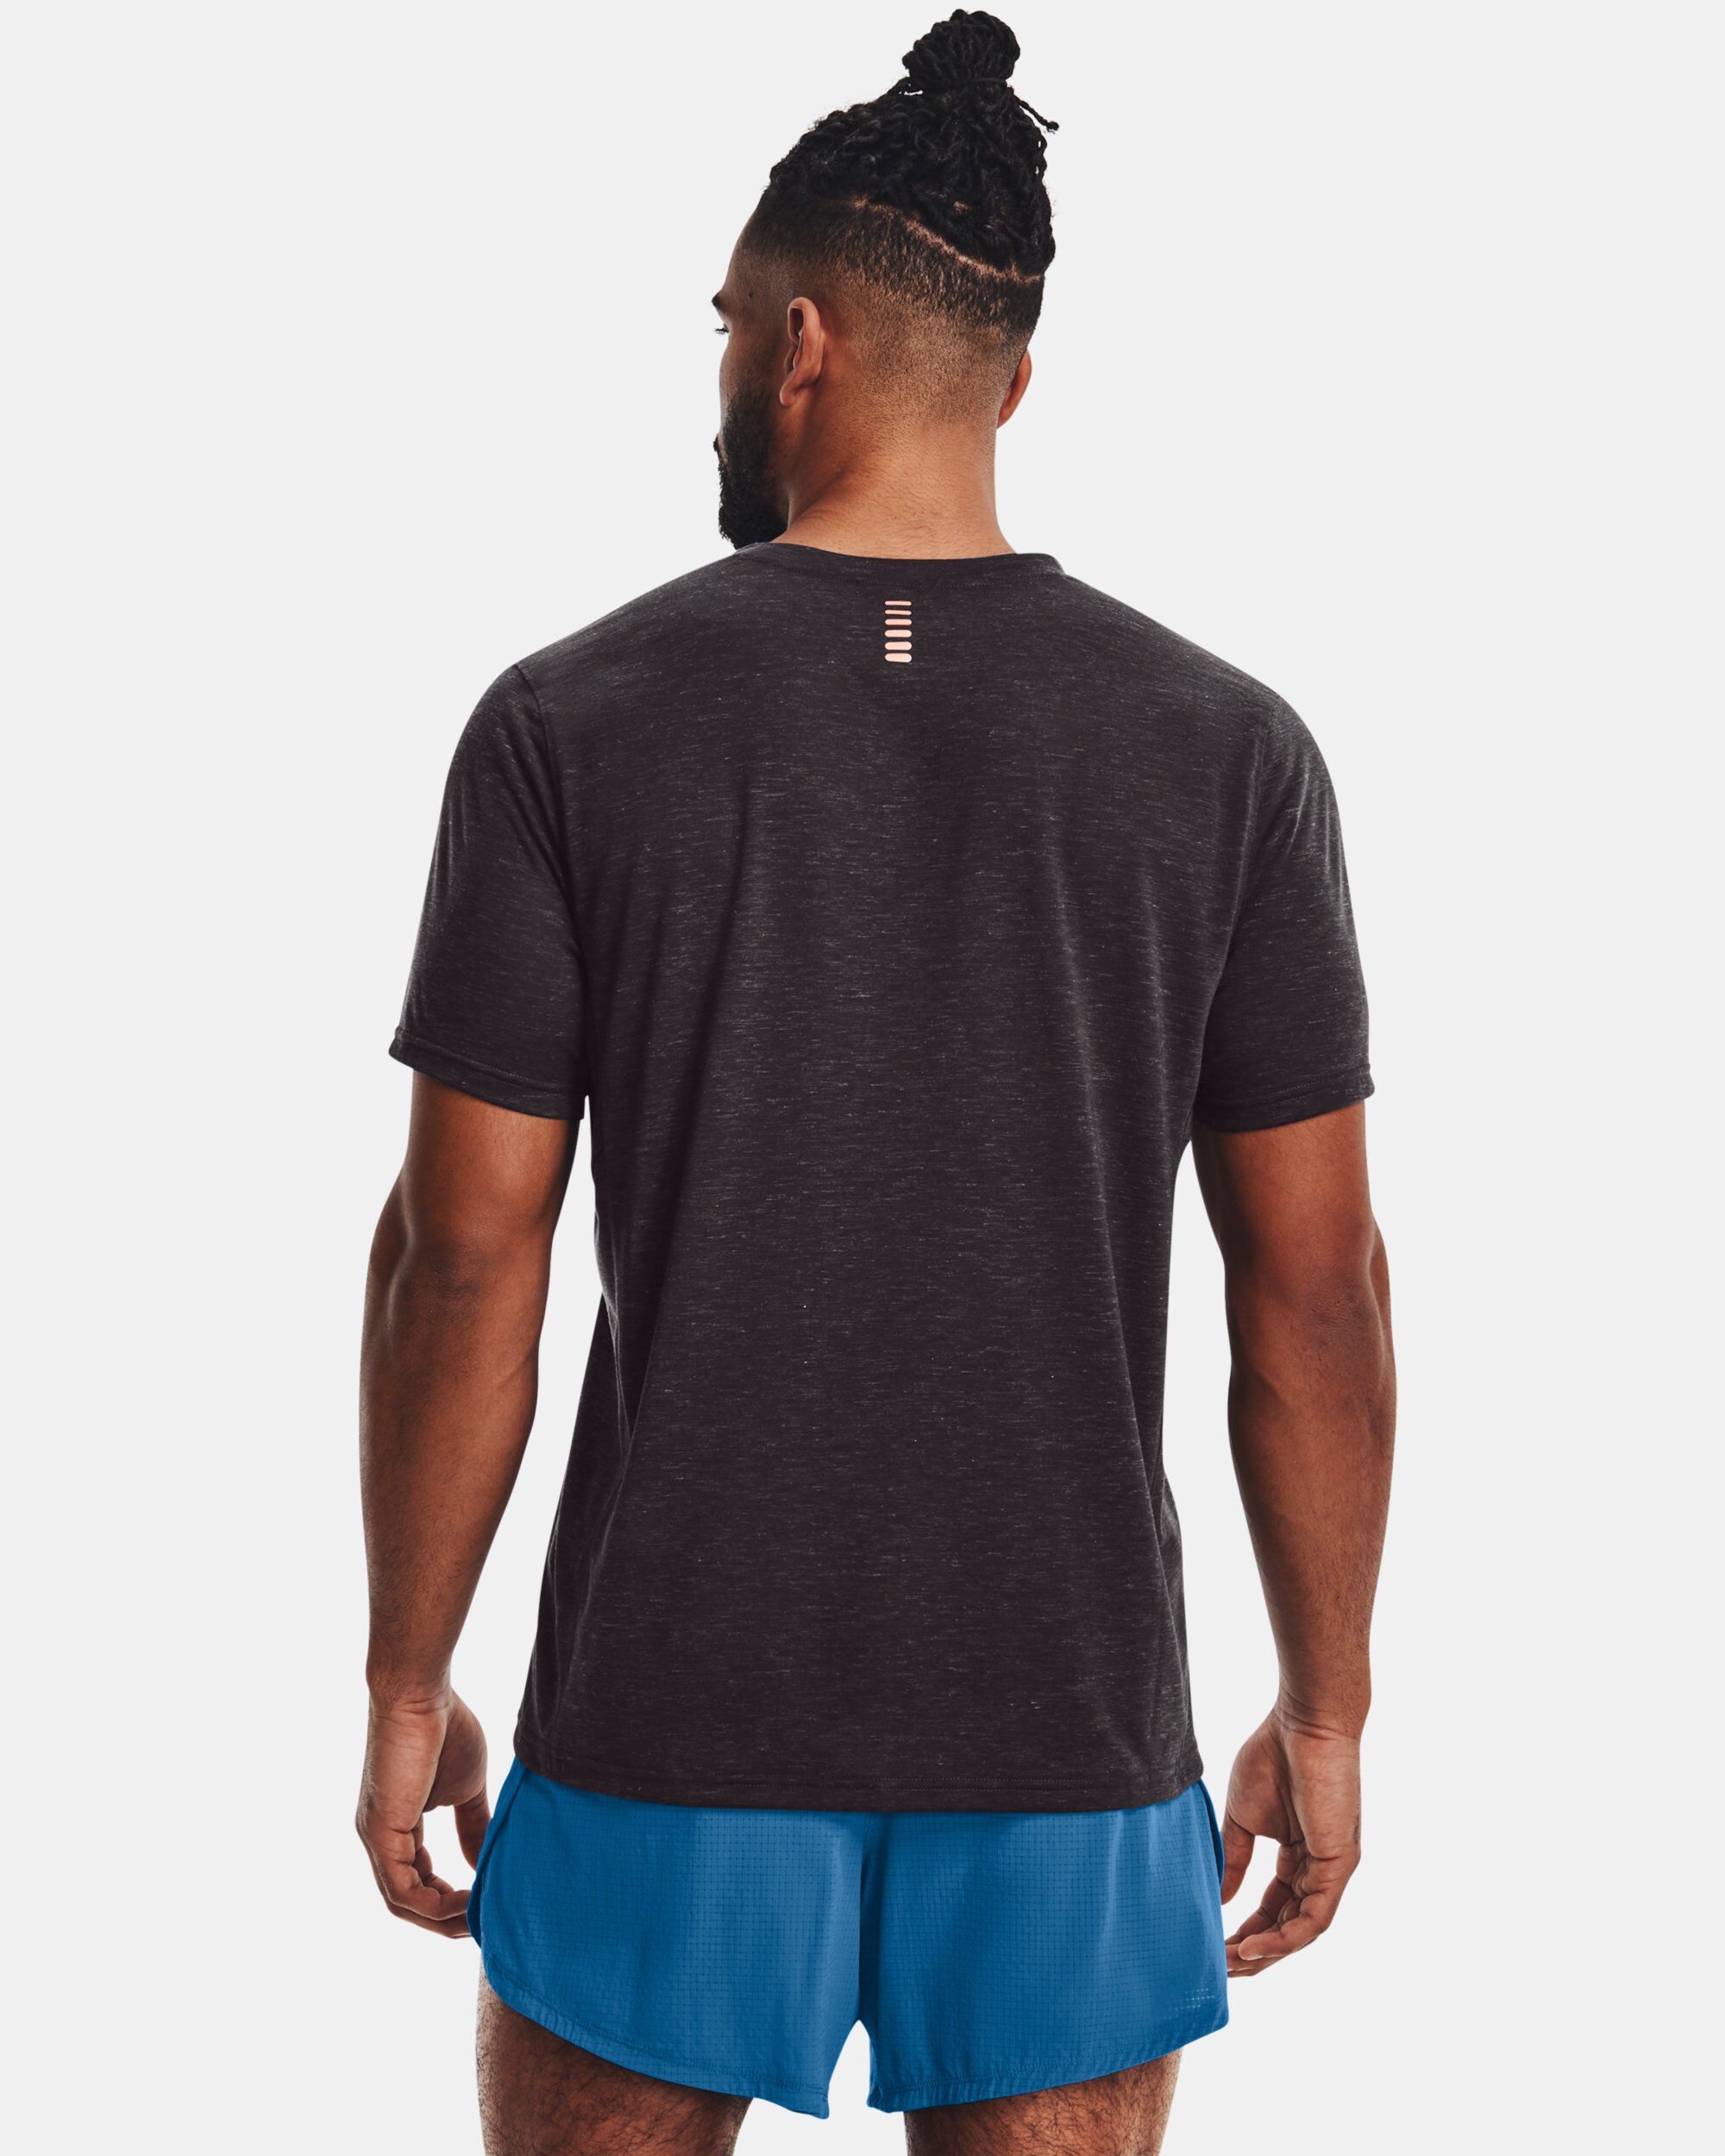 Under Armour Men's Charged Cotton 4 way stretch "Extend the Game" T-Shirt 